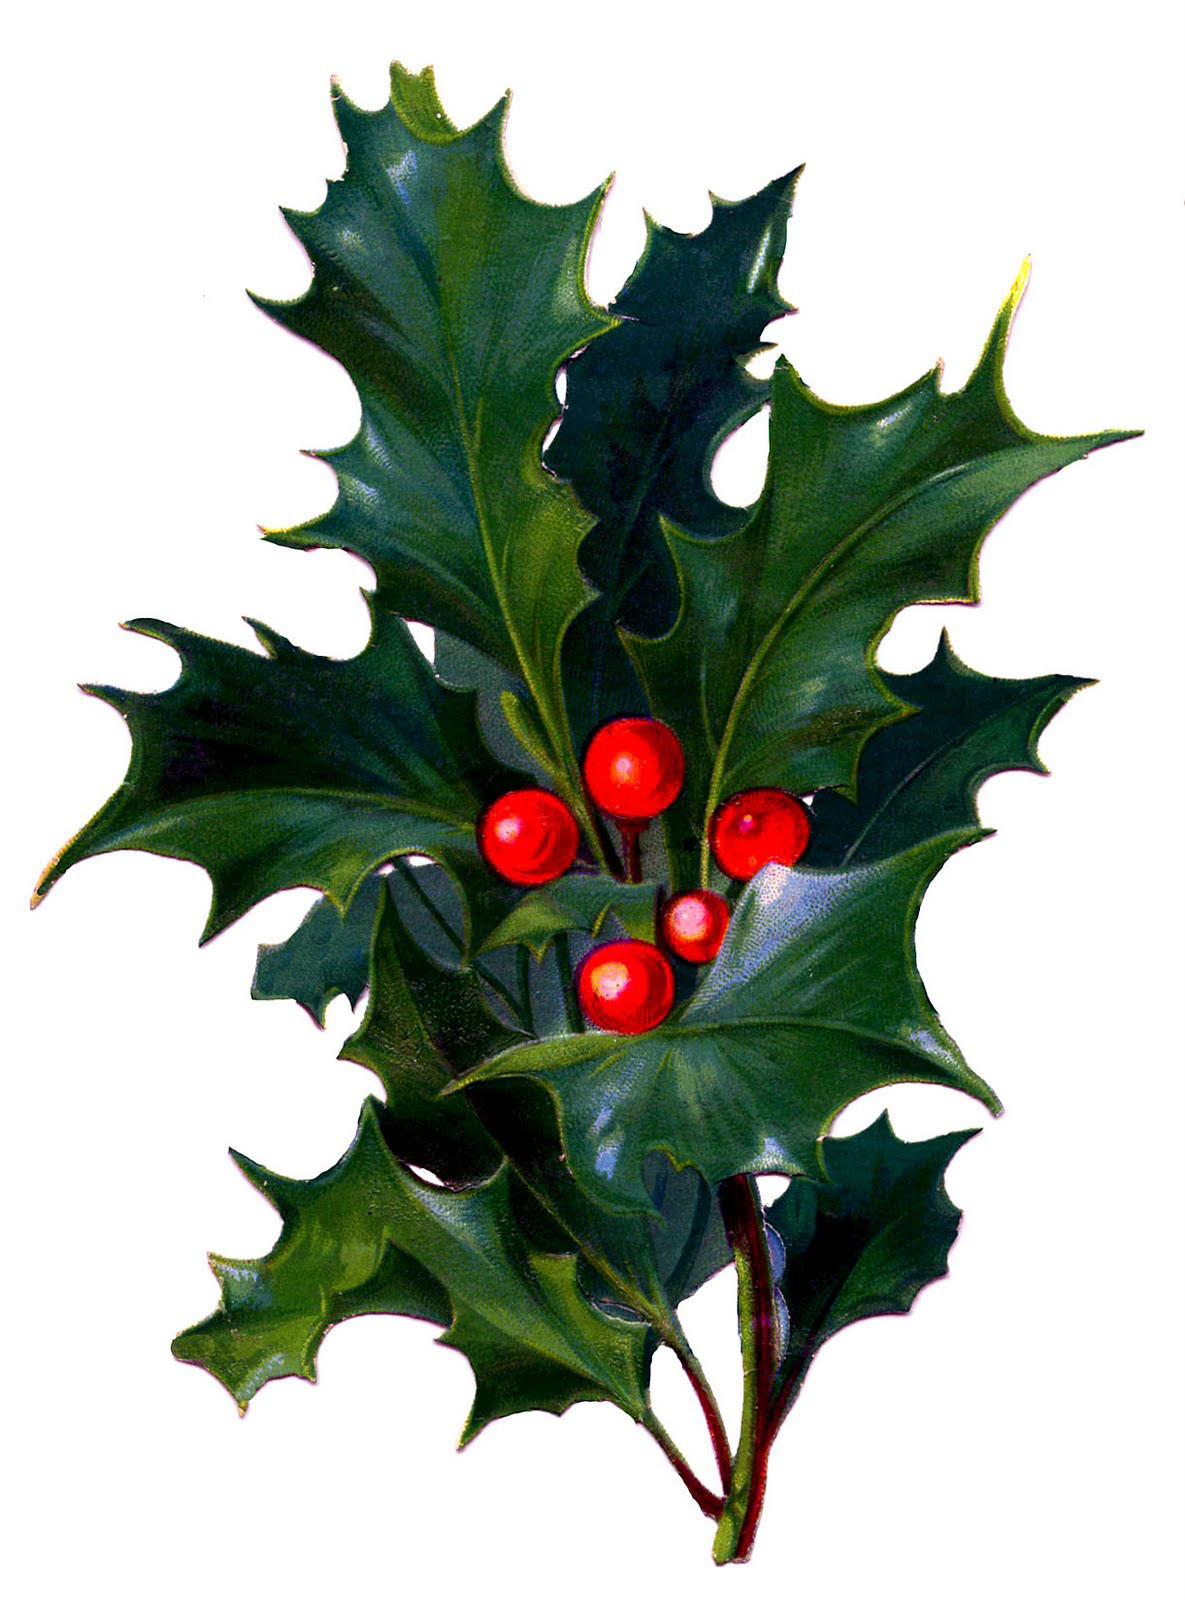 Christmas holly Stock Photos, Royalty Free Christmas holly Images